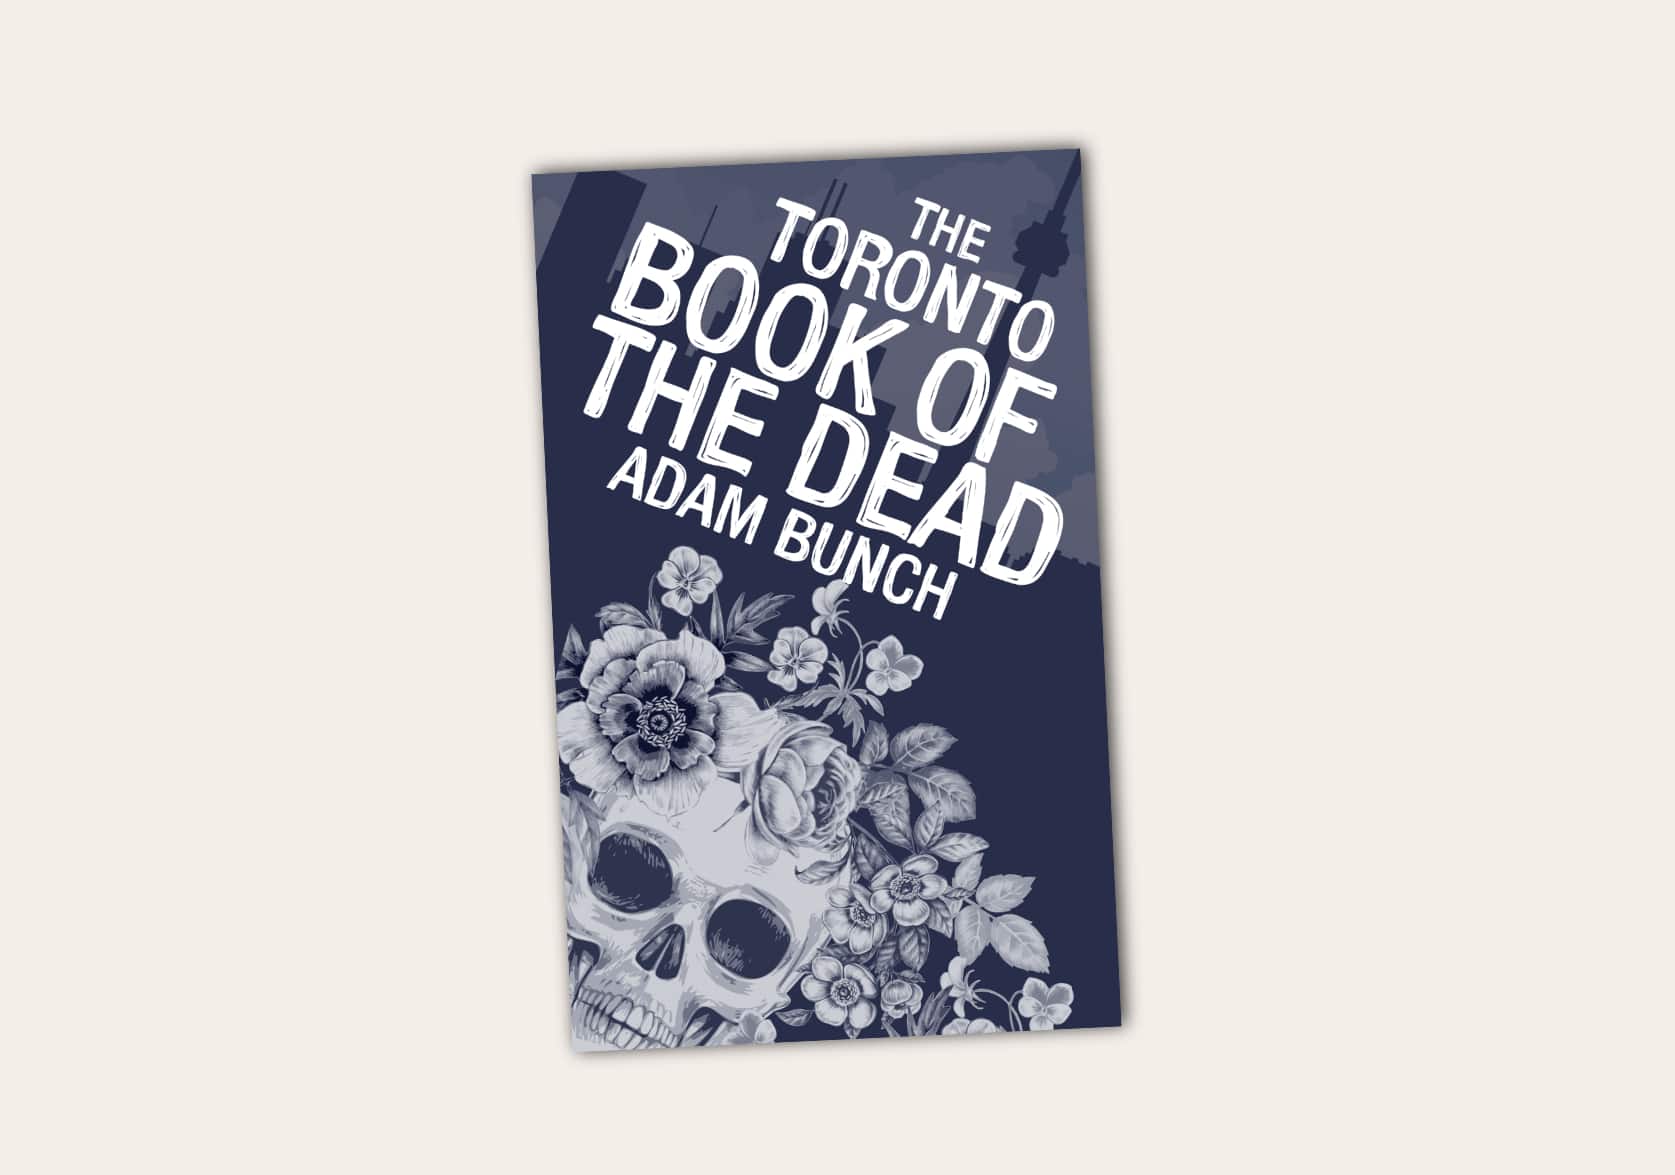 The Toronto Book of the Dead by Adam Bunch